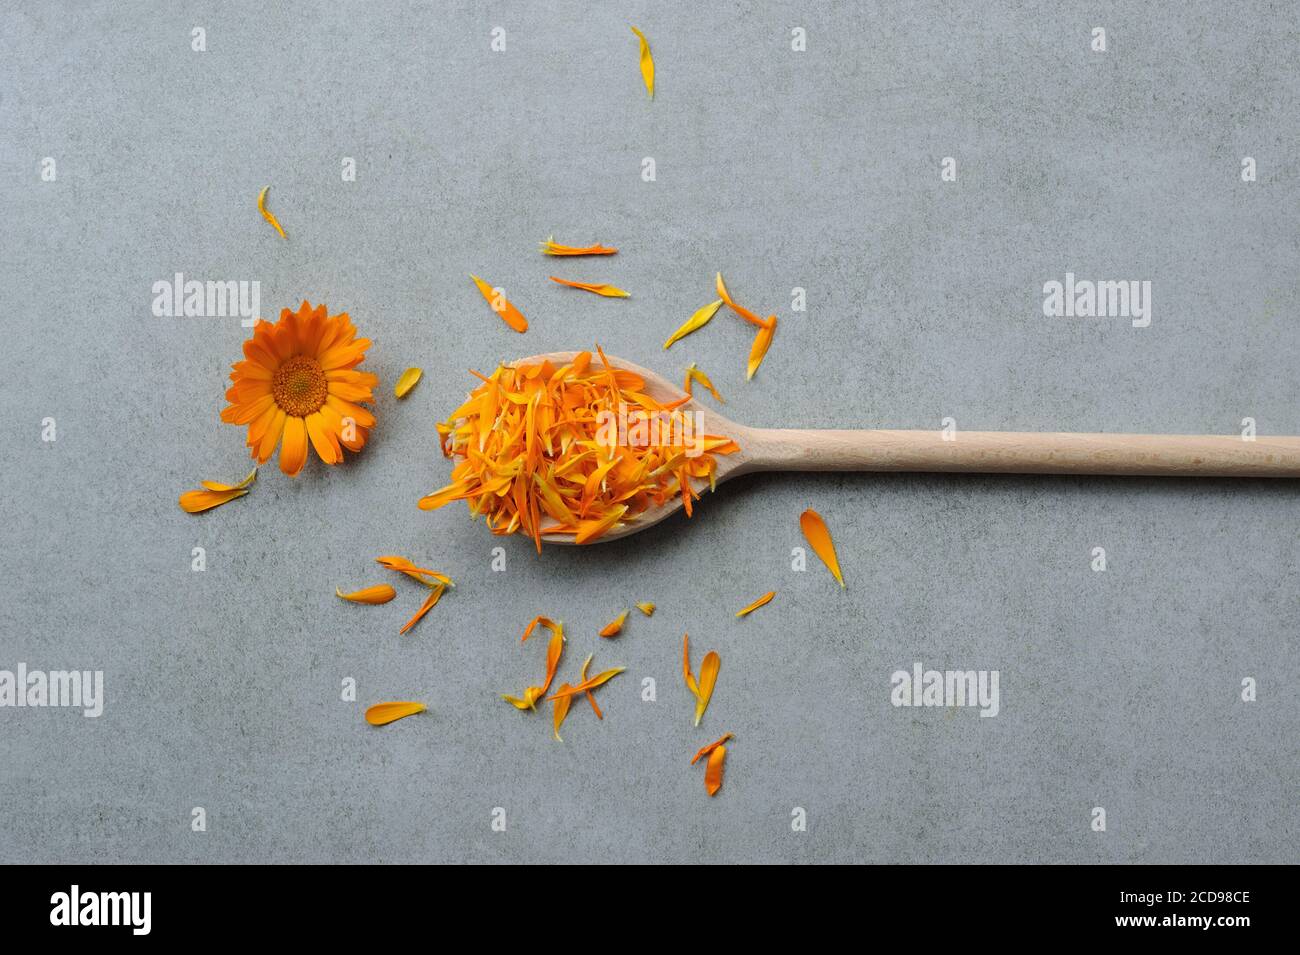 Calendula officinalis flowers and petals preparing for drying. Medicinal herb. Floral background.Image for decoration design. Flat lay,horizontal. Stock Photo